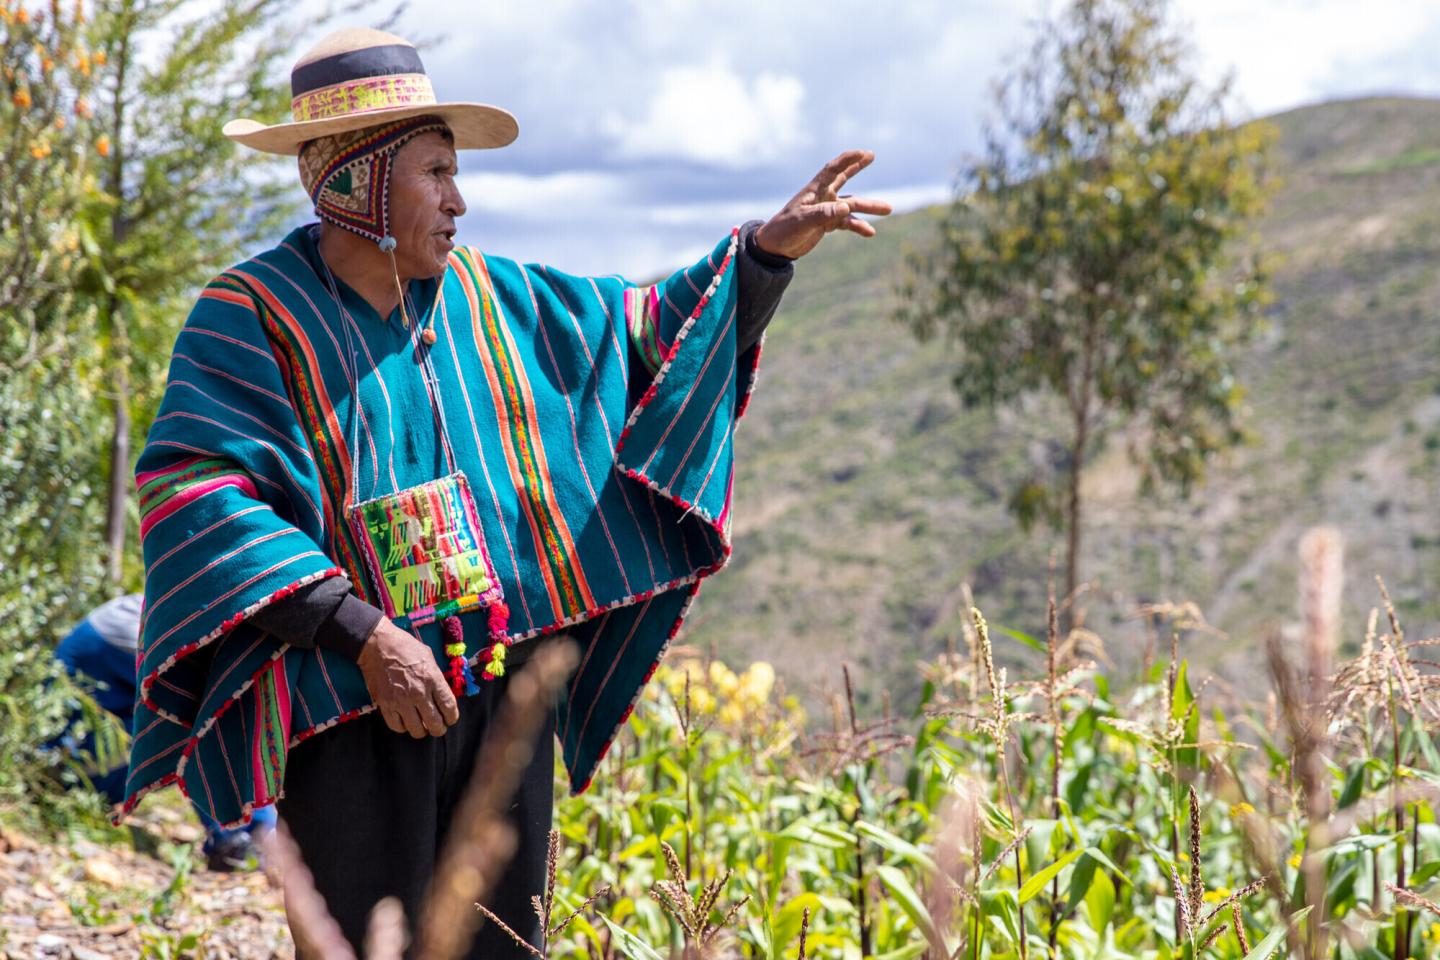 An Indigenous Bolivian man stands in a field and points to something off on the right. He is wearing a blue poncho and a hat.